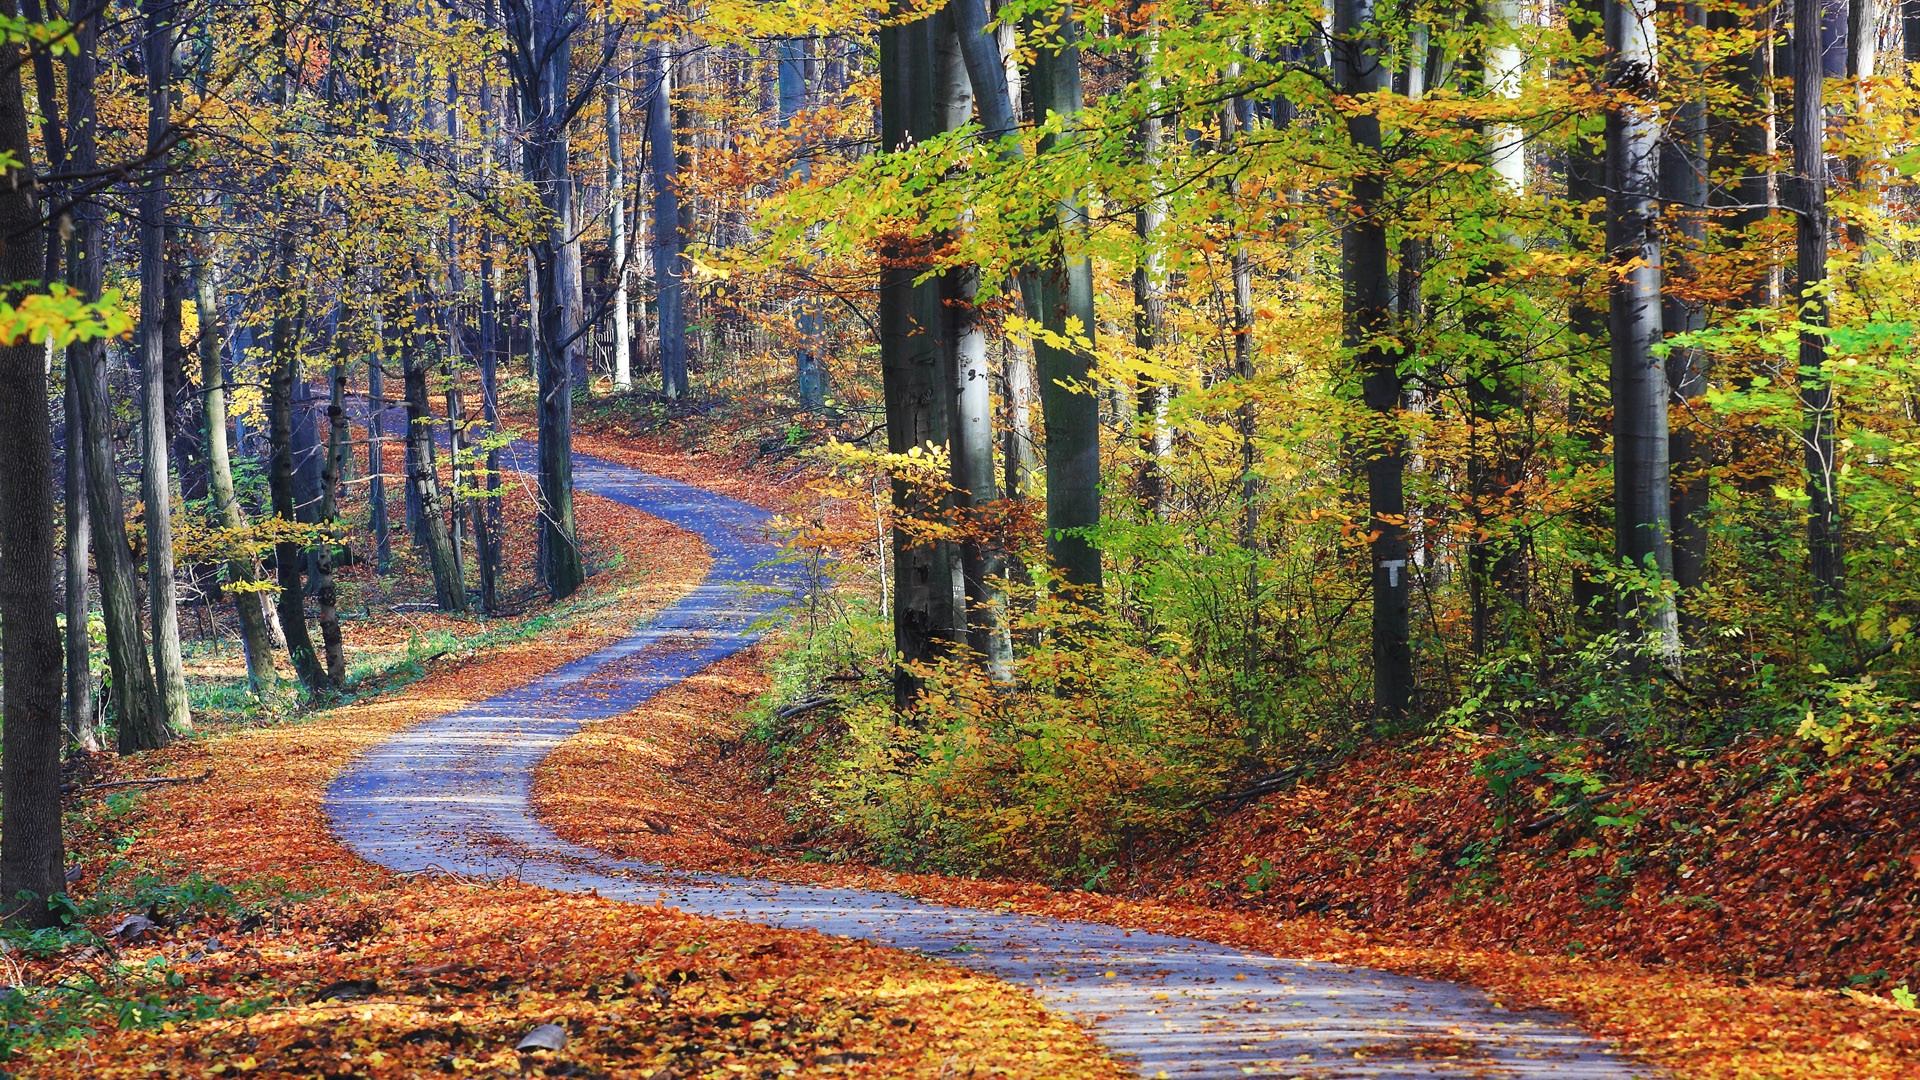 General 1920x1080 nature landscape far view trees road leaves fall forest plants Hungary